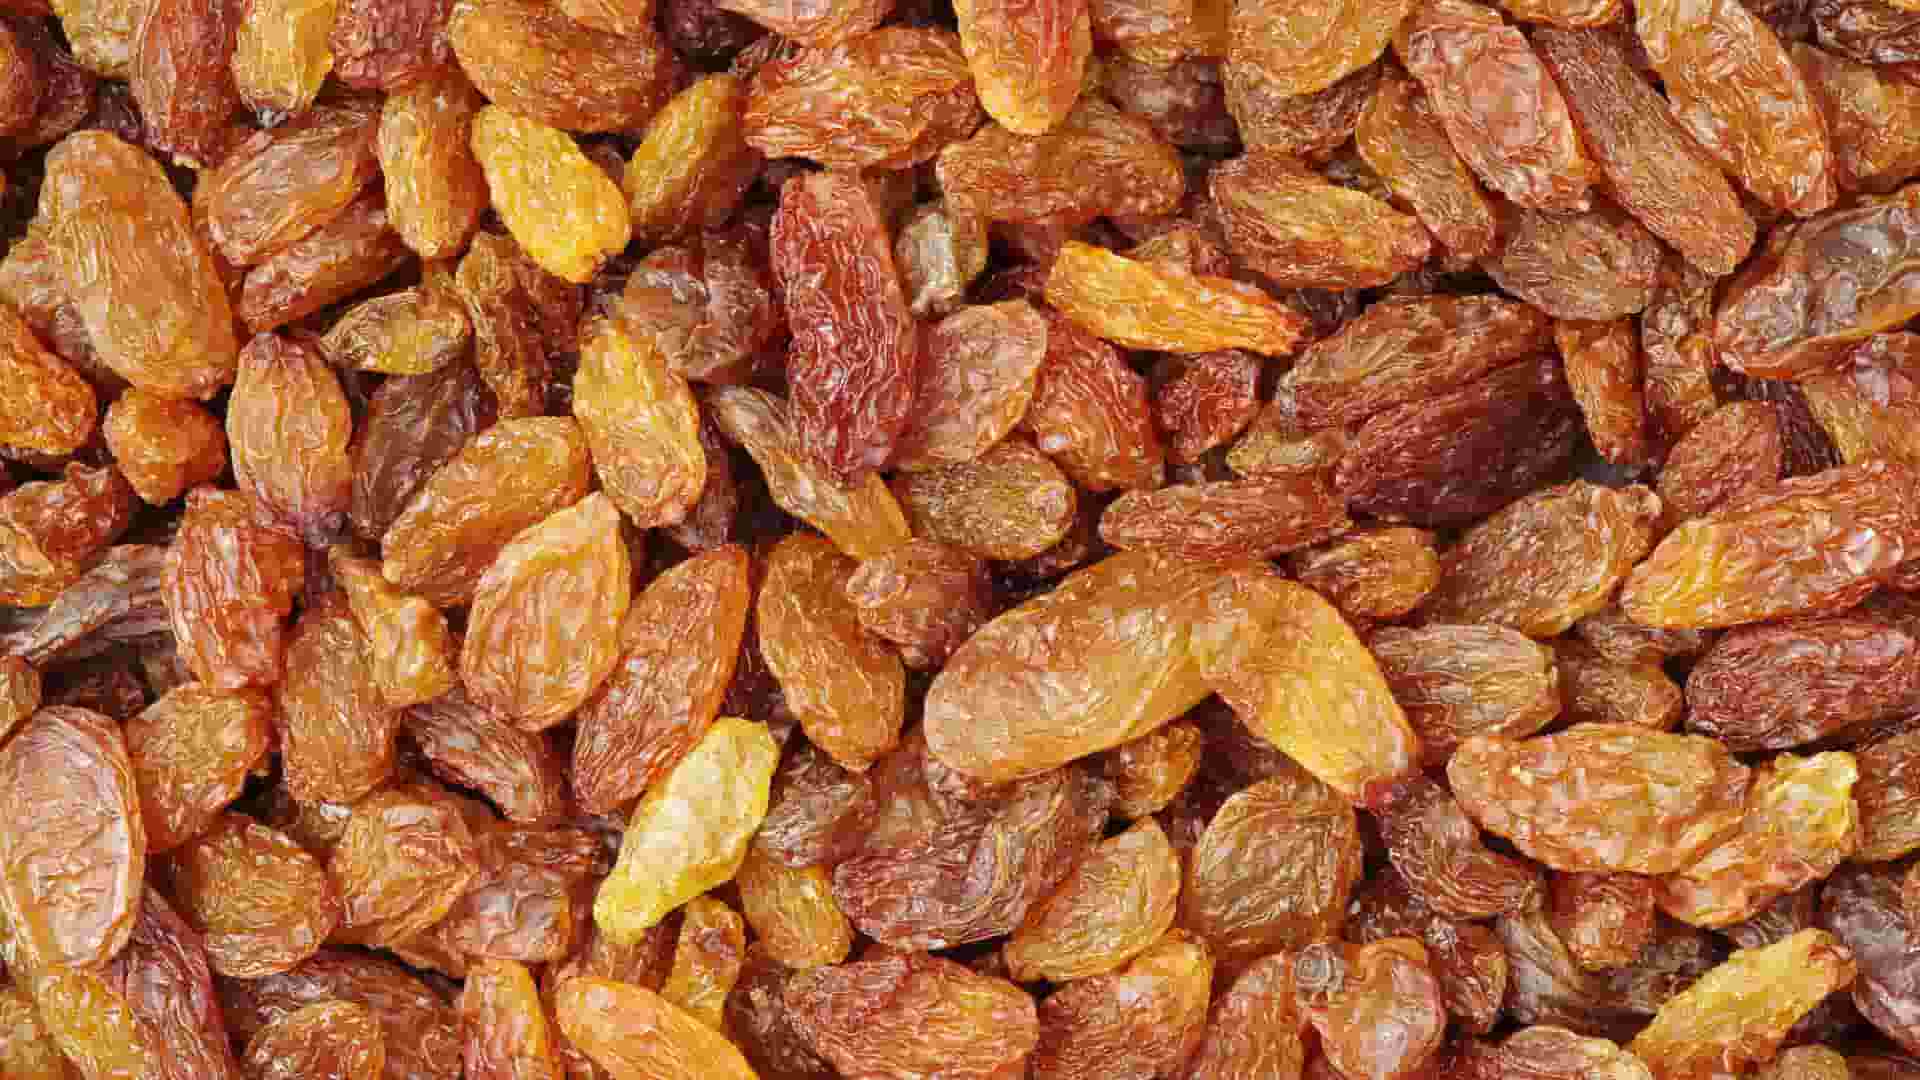  golden raisins Purchase Price + Sales In Trade And Export 